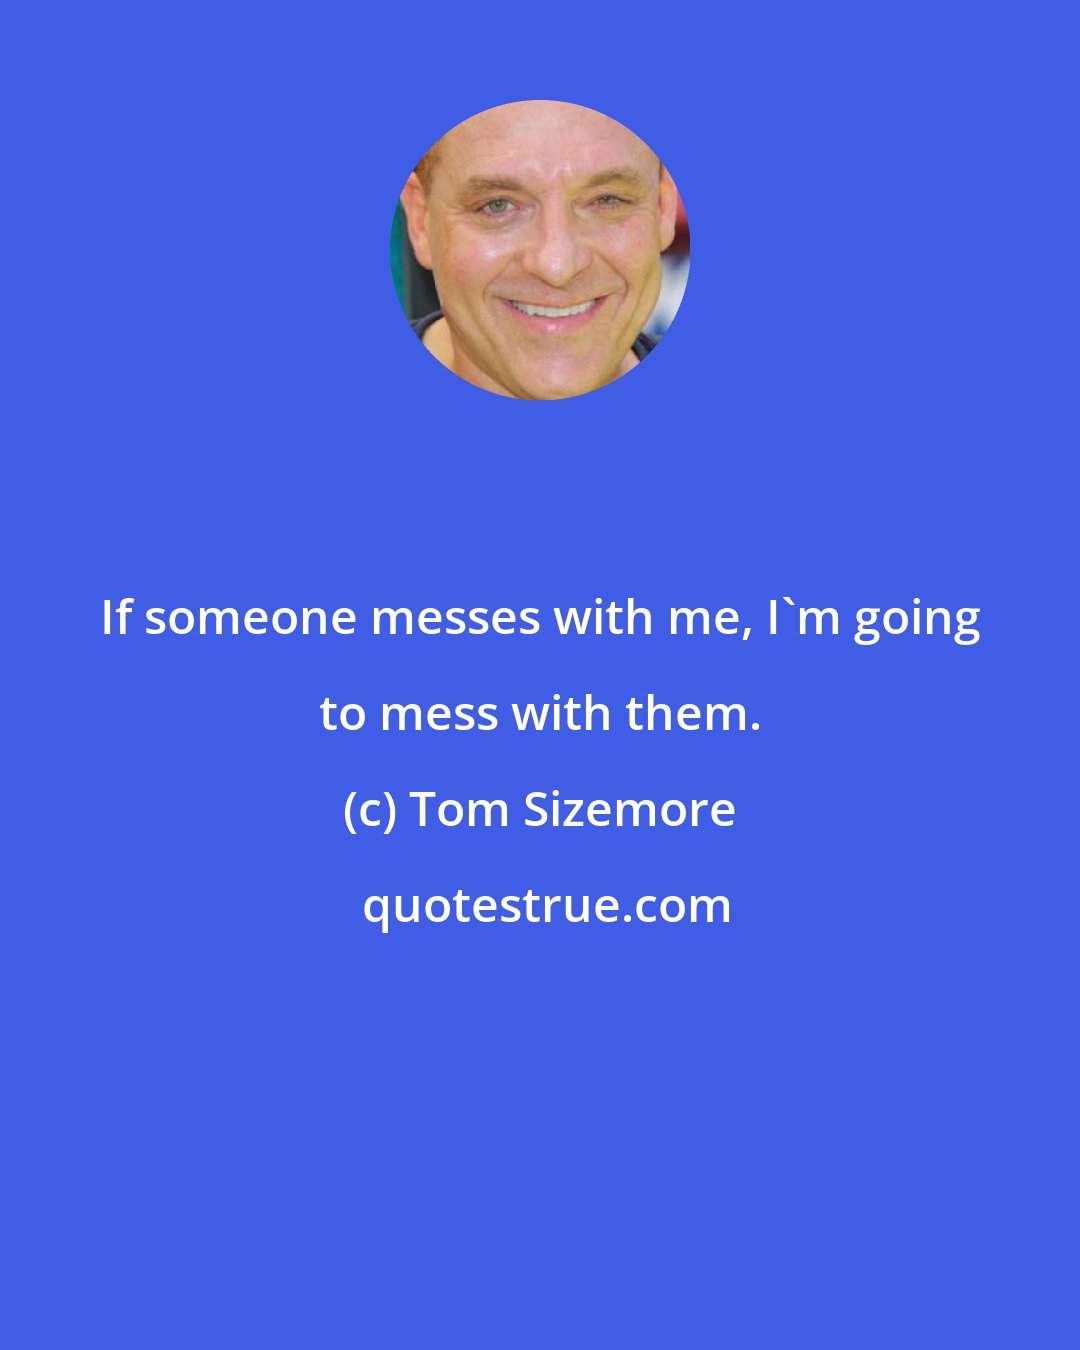 Tom Sizemore: If someone messes with me, I'm going to mess with them.